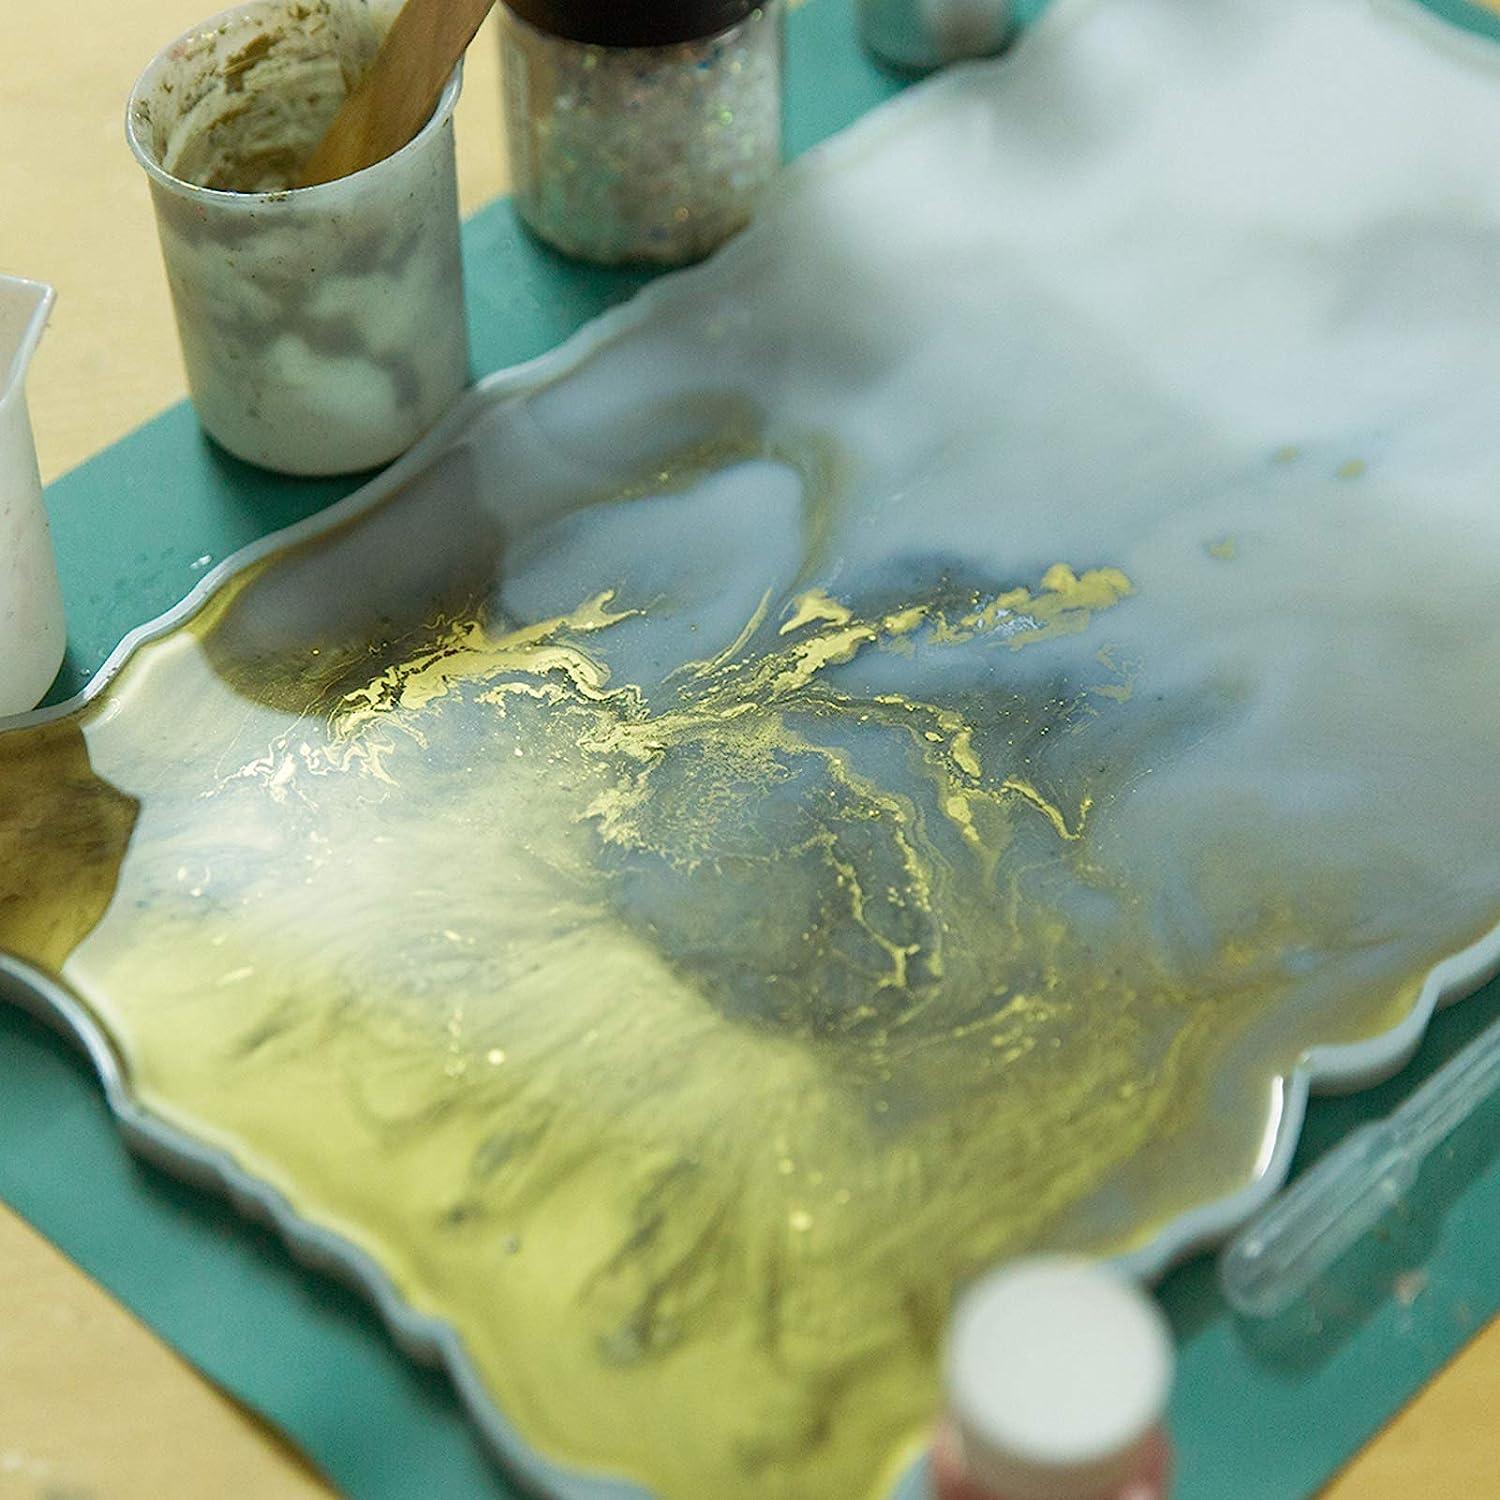 Glitter and Ink Resin Tray, Freeform Mold, Resin Art Tray 